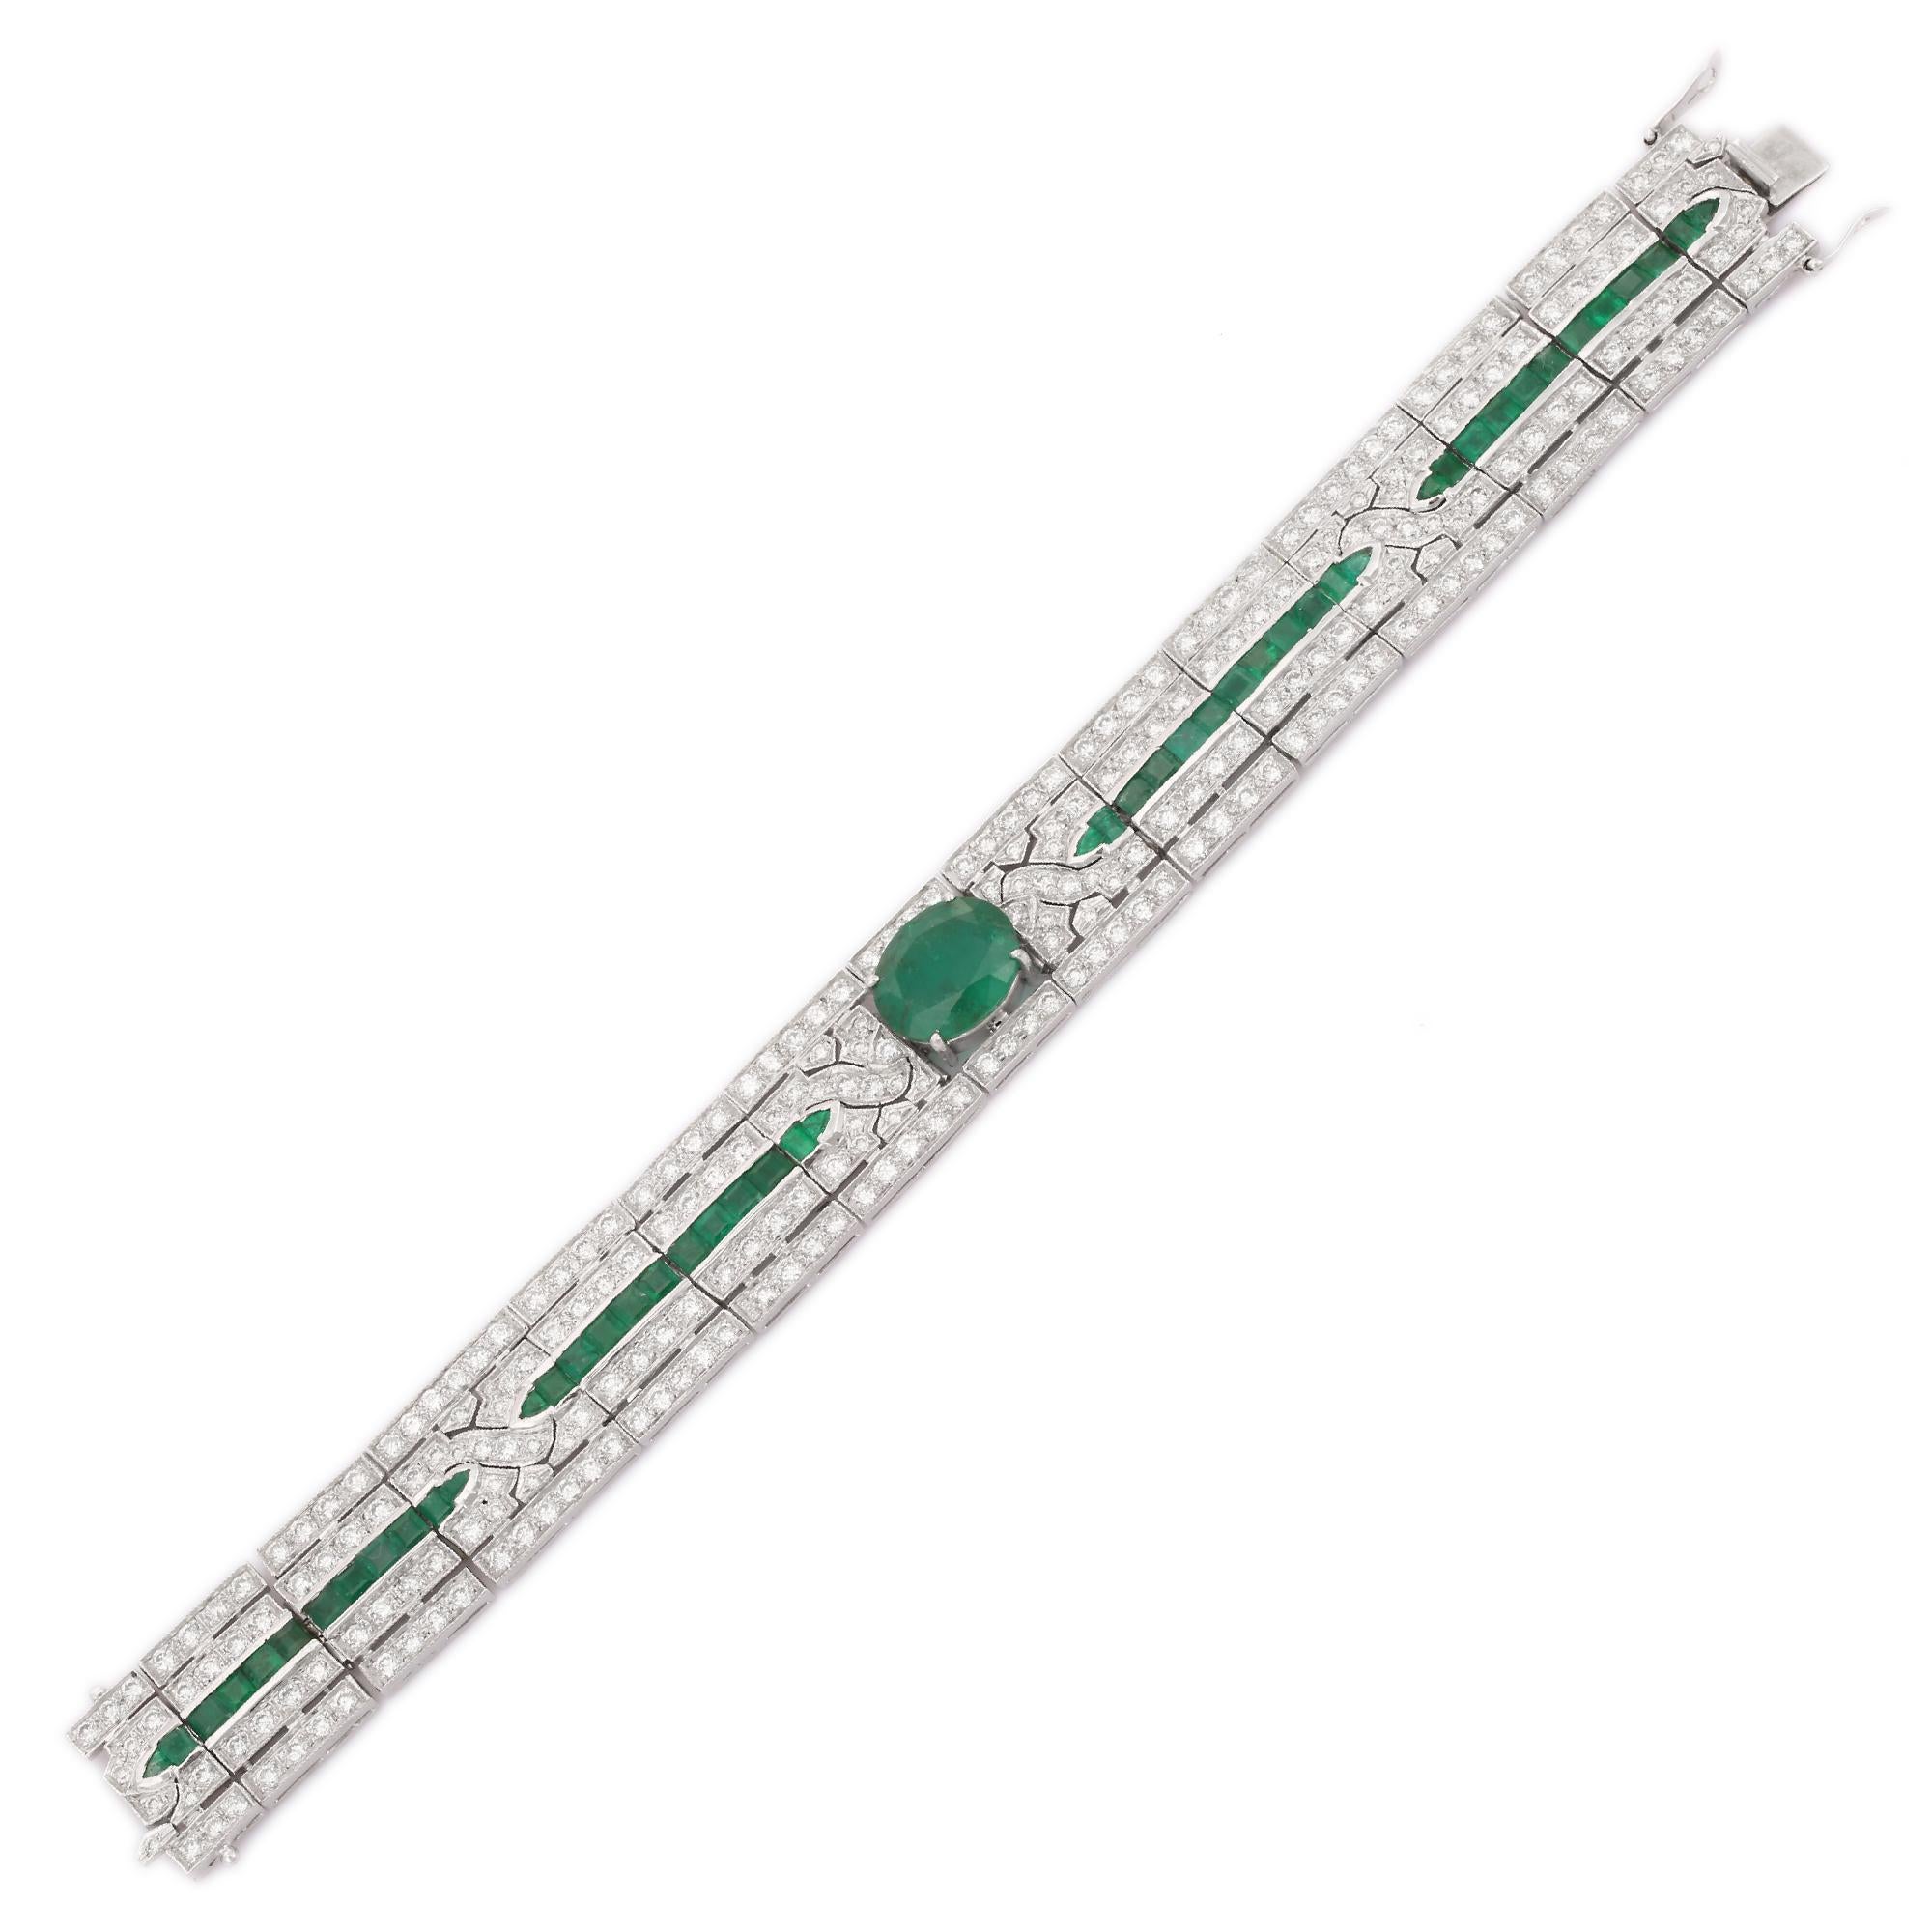 This Emerald Diamond Tennis Bracelet in 18K gold showcases 25 endlessly sparkling natural emerald, weighing 12.61 carat and diamonds weighing 9.55 carat. It measures 7 inches long in length. 
Emerald enhances the intellectual capacity of the